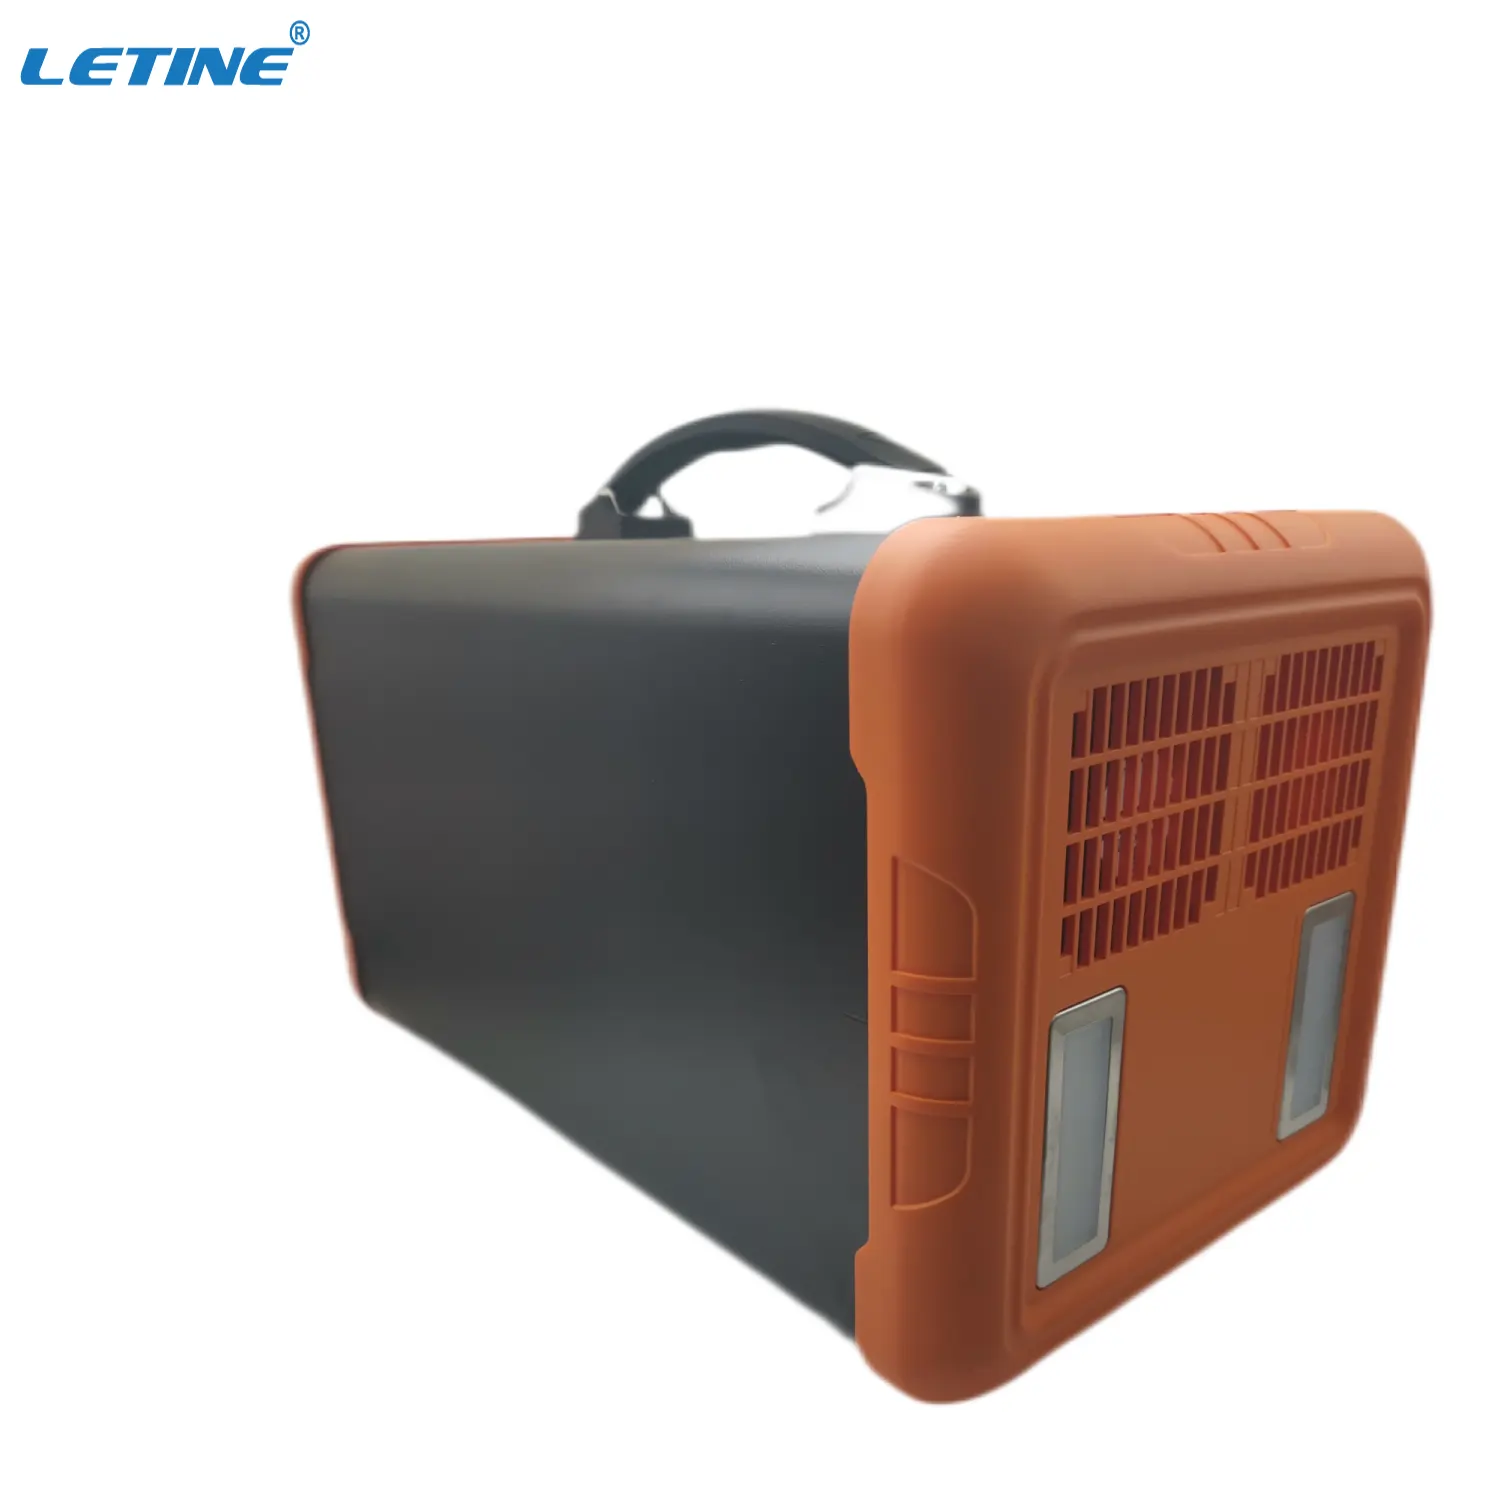 1000w Portable Power Station For Outdoor Travel Laptop Power Supply 12v Power Supply Powersupply